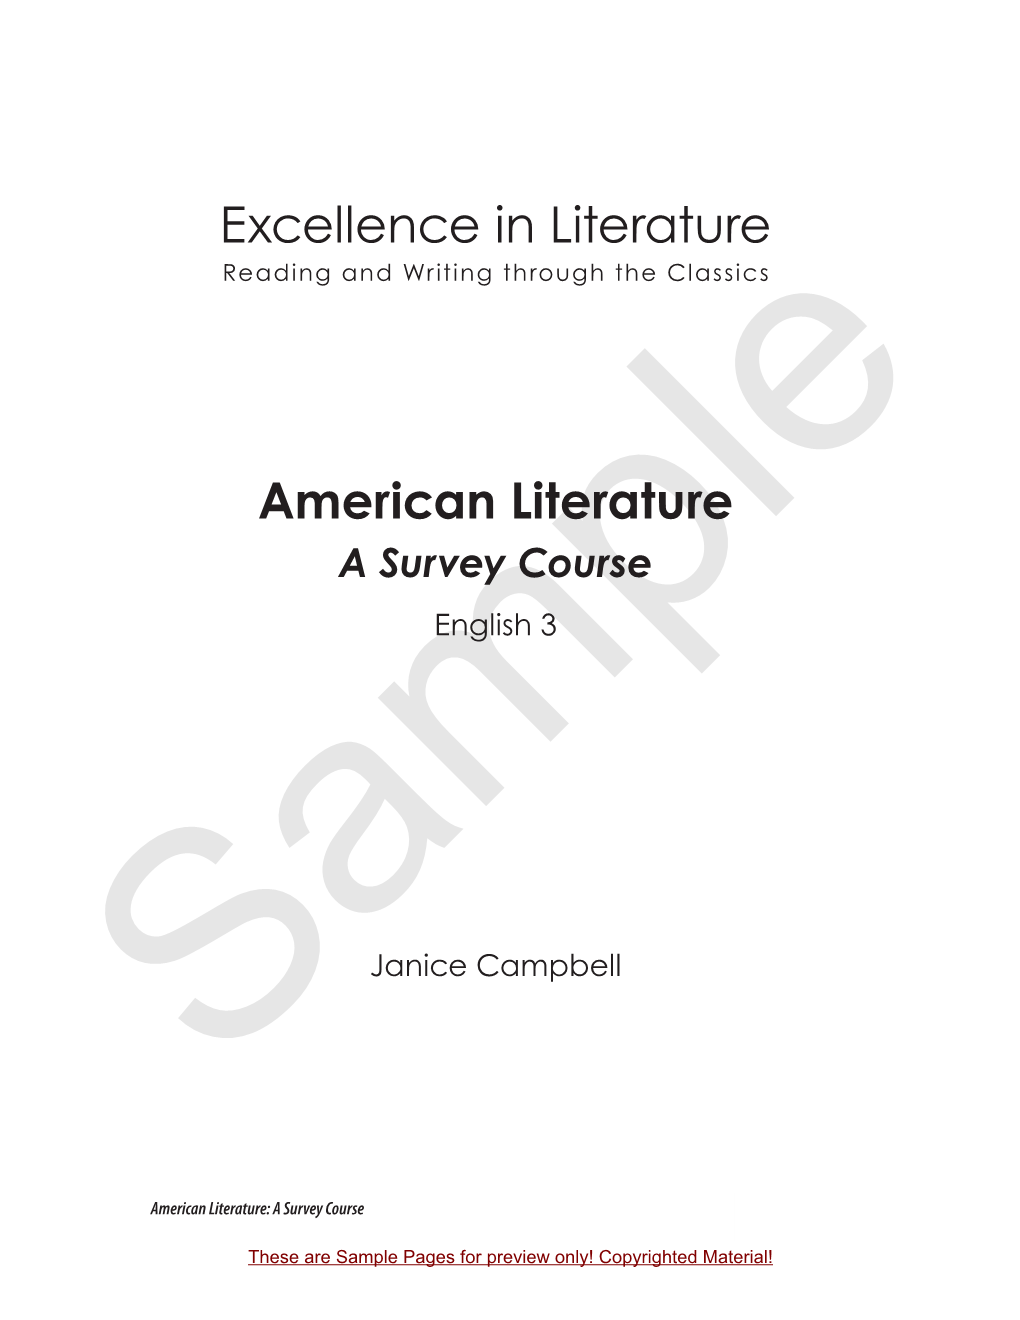 Excellence in Literature Reading and Writing Through the Classics